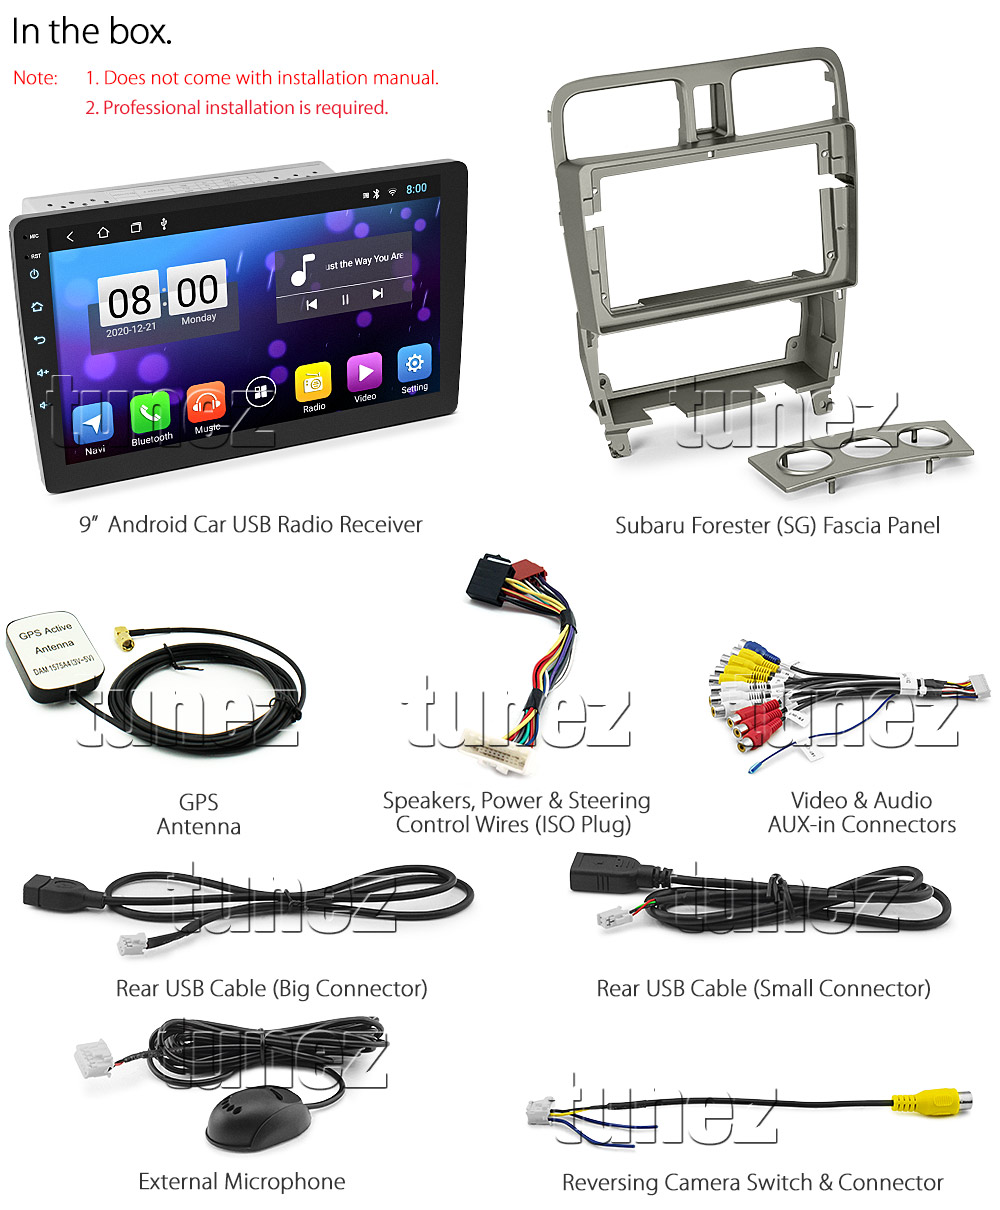 SBR19AND GPS Aftermarket Subaru Forester SG Year 2003 2004 2005 2006 2007 2008 super large 9-inch 9' Touch Screen TFT Capacitive Double Din Latest Australia UK European USA Original Android 10 10 car USB Charger 1.5A Player Radio Stereo Head Unit Details Aftermarket External and Internal Microphone Bluetooth Europe Sat Nav Navi Plug and Play ISO Plug Wiring Harness Matching Fascia Kit Facia Free Reversing Camera Album Art ID3 Tag RMVB MP3 MP4 AVI MKV Full High Definition FHD AirPlay Air Play MirrorLink Mirror Link 1080p DAB+ Digital Radio DAB +